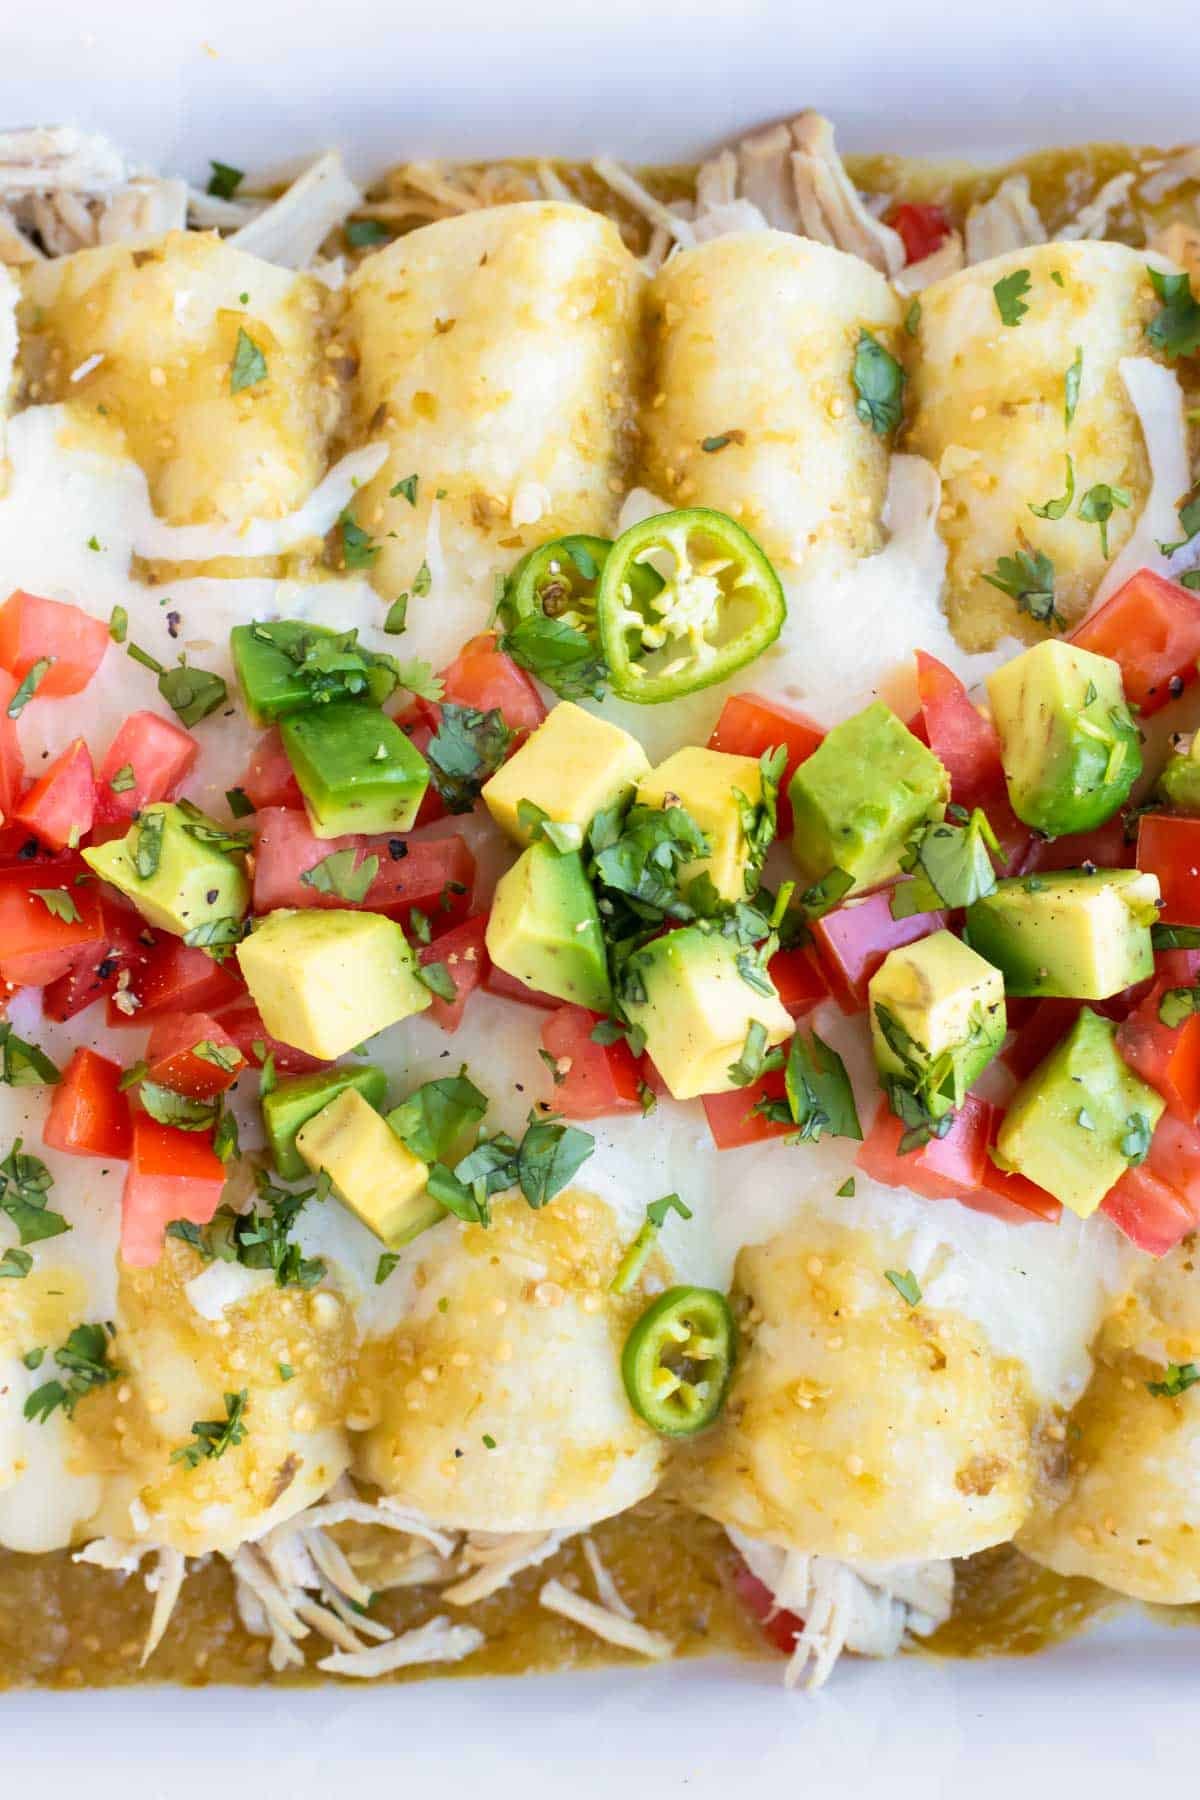 Healthy enchiladas with salsa verde and shredded chicken in a white pan.